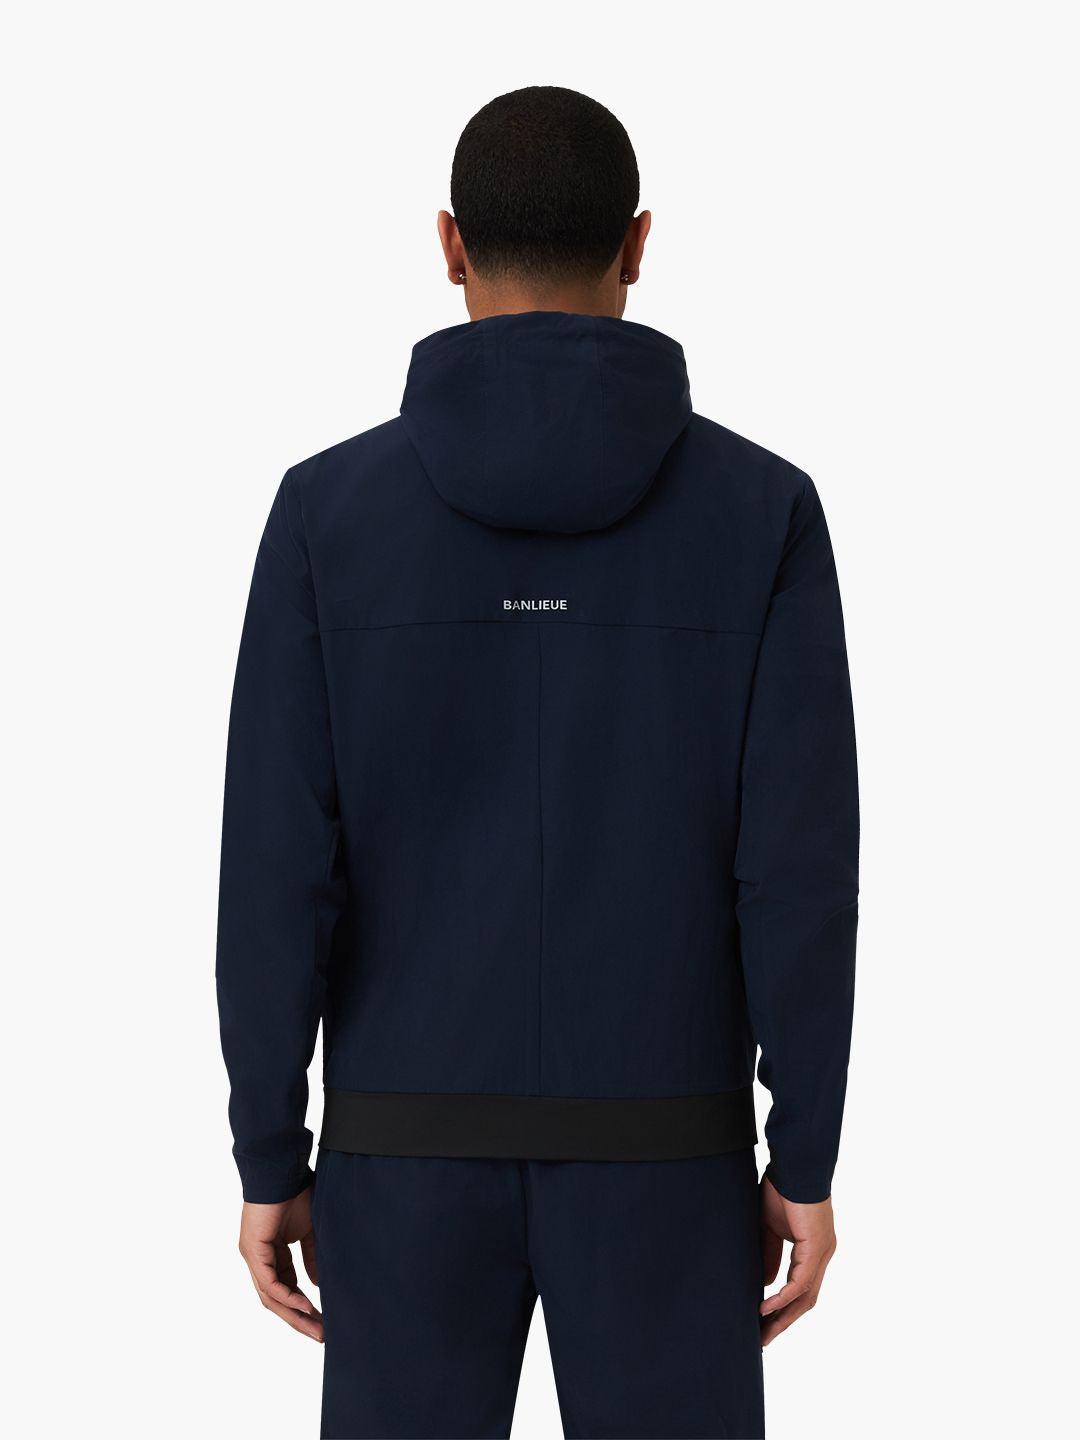 PERFORMANCE HOODED TRACKTOP | NAVY